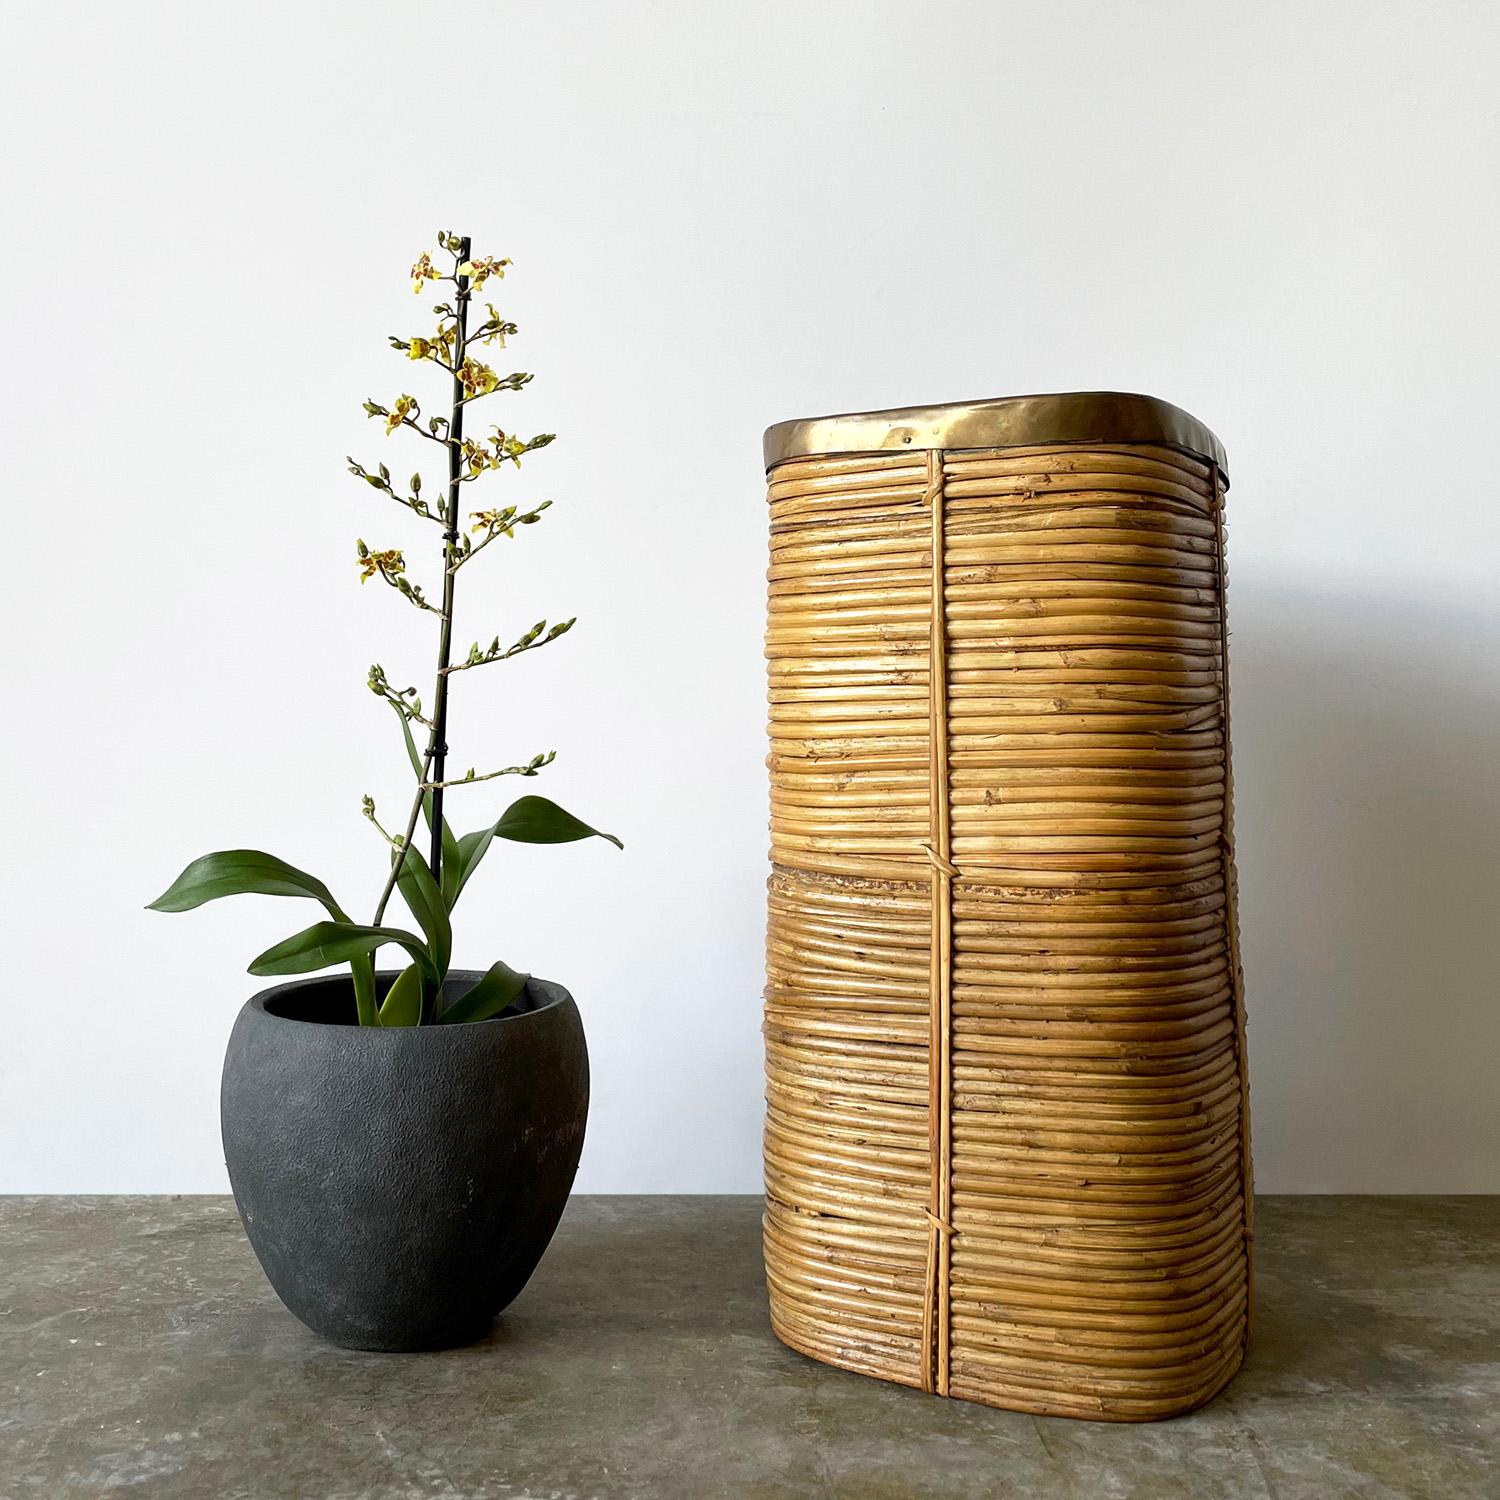 Italian pencil reed bamboo planter bin in the style of Gabriella Crespi
Coiled bamboo vessel with natural color variations
Aged brass rim 
Substantial piece in weight and composition
Patina from age and use
Can be used as a waste bin, umbrella